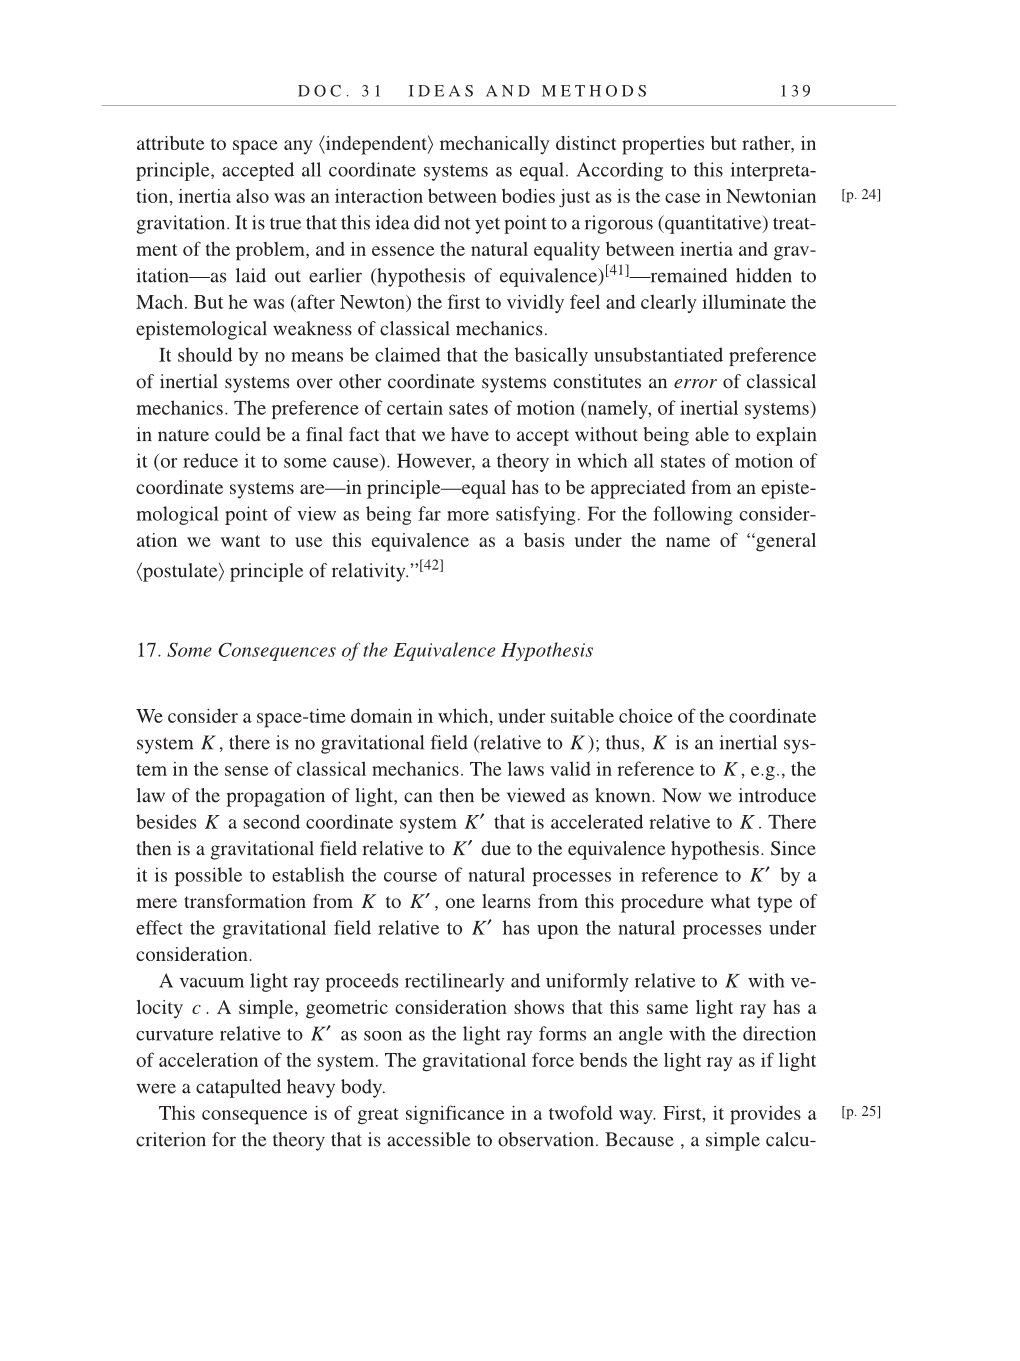 Volume 7: The Berlin Years: Writings, 1918-1921 (English translation supplement) page 139